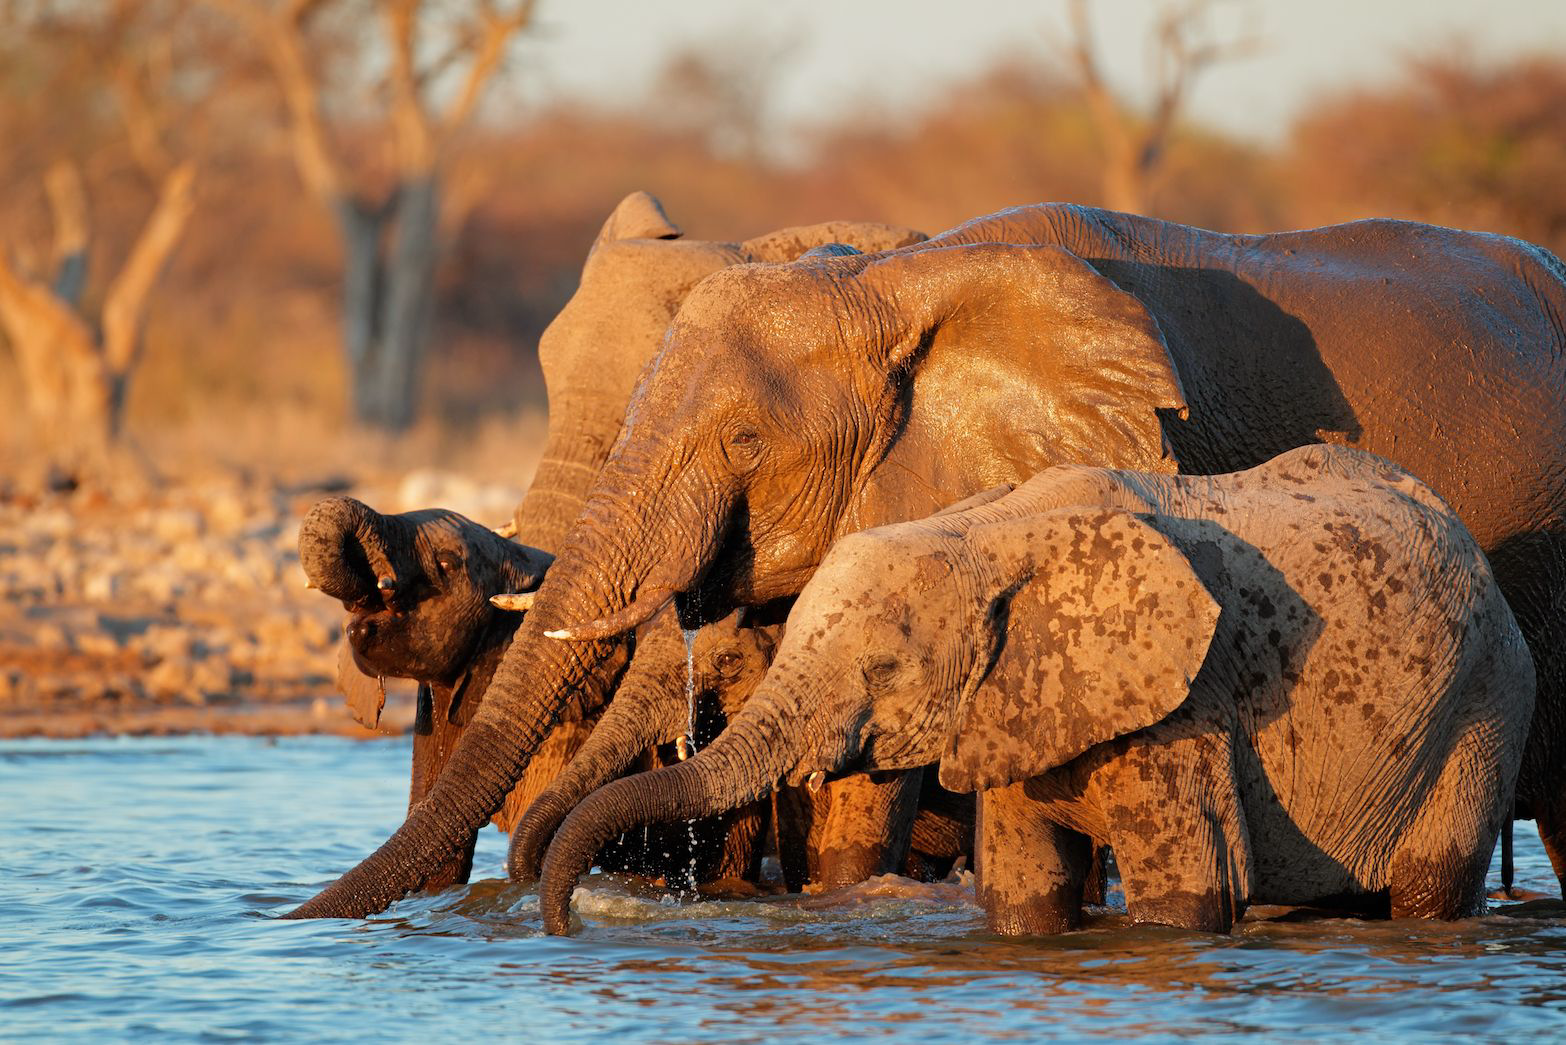 elephants enjoying being safe in the water